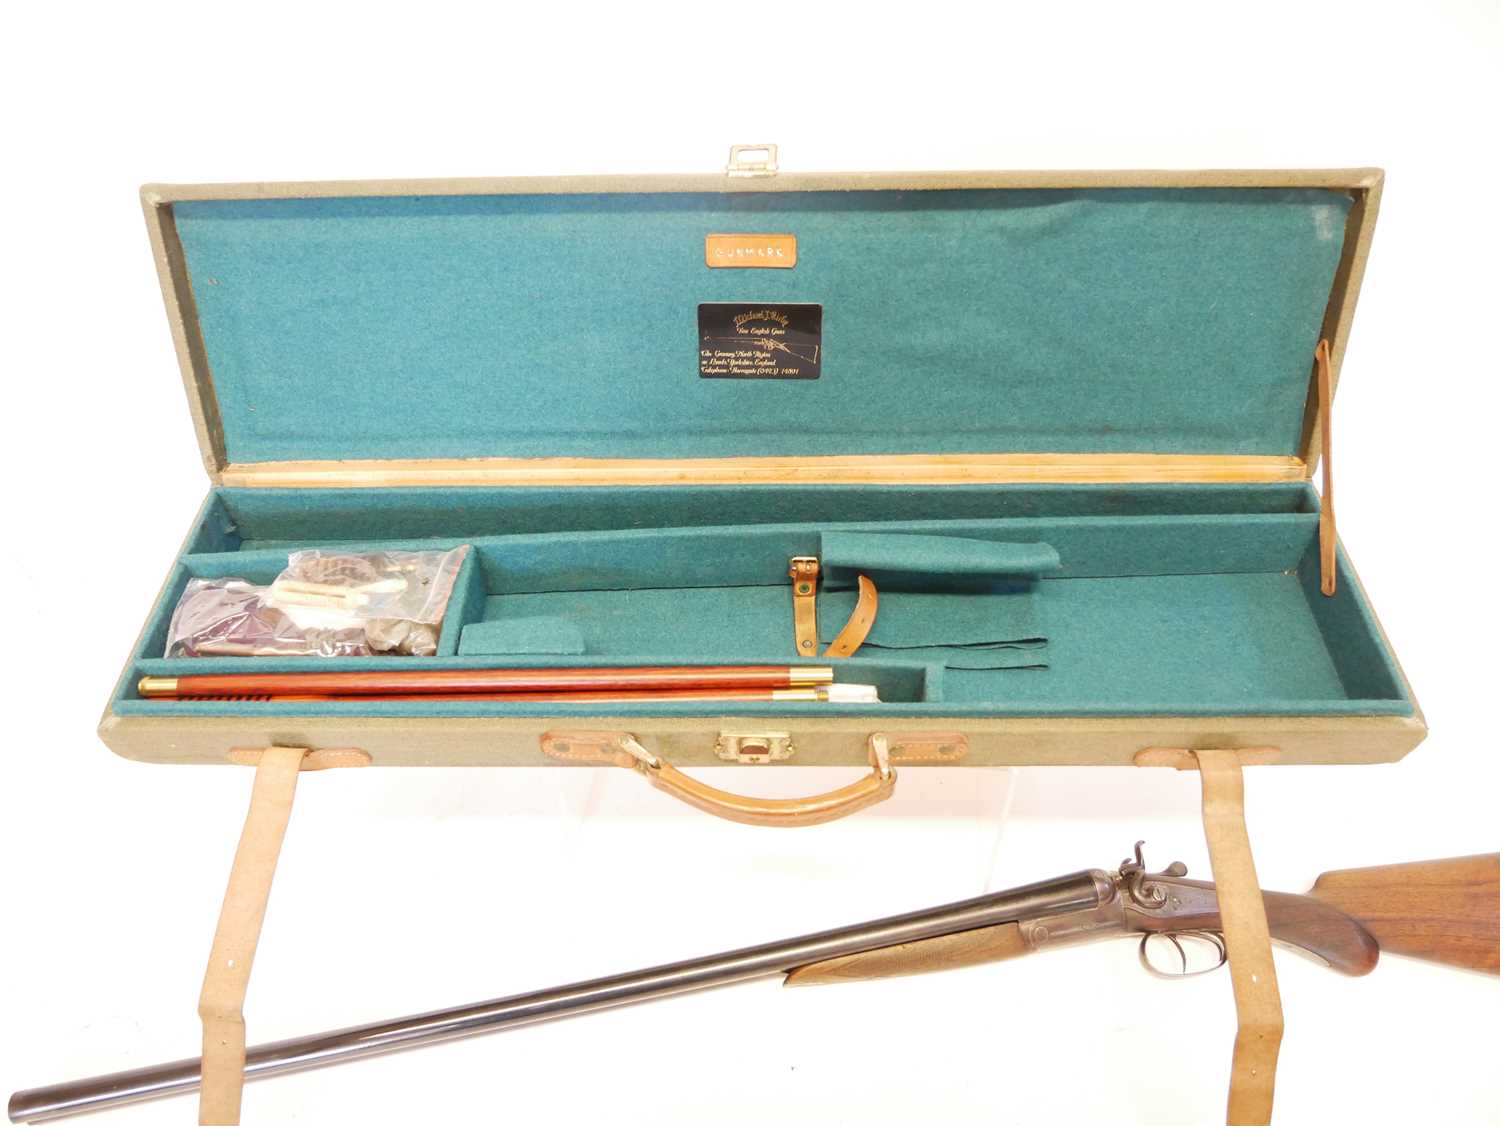 Midland 12 bore side by side hammer gun with a Gunmark travel case, serial number 32121, 30 inch - Image 14 of 16